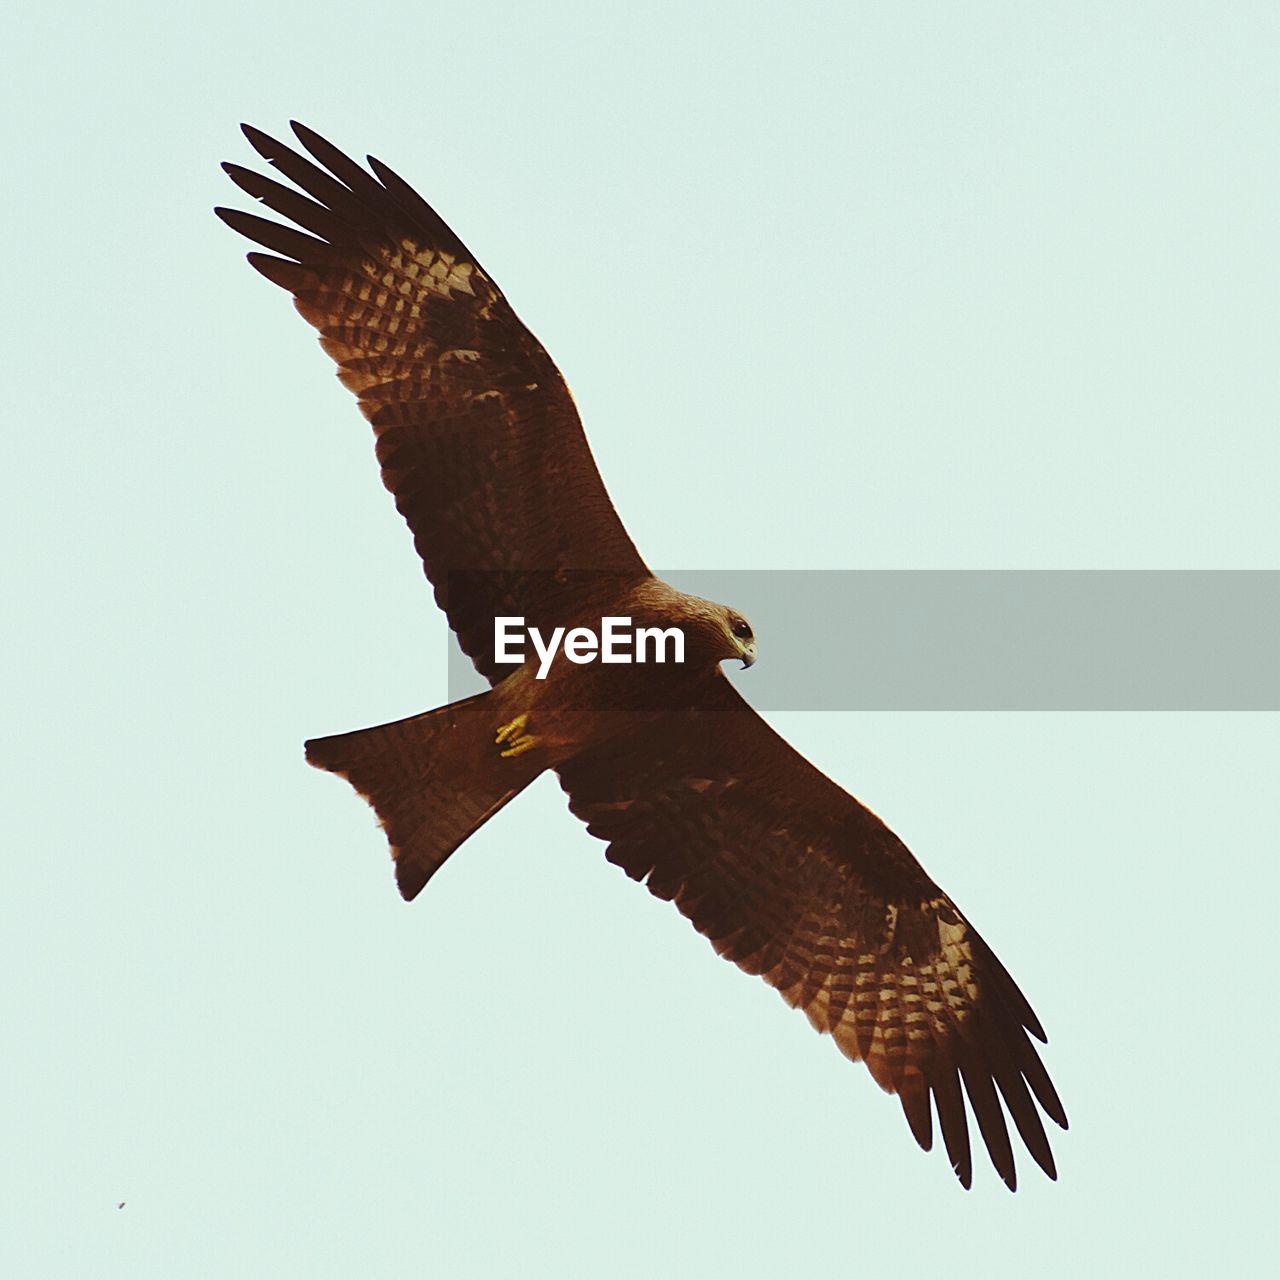 LOW ANGLE VIEW OF EAGLE FLYING